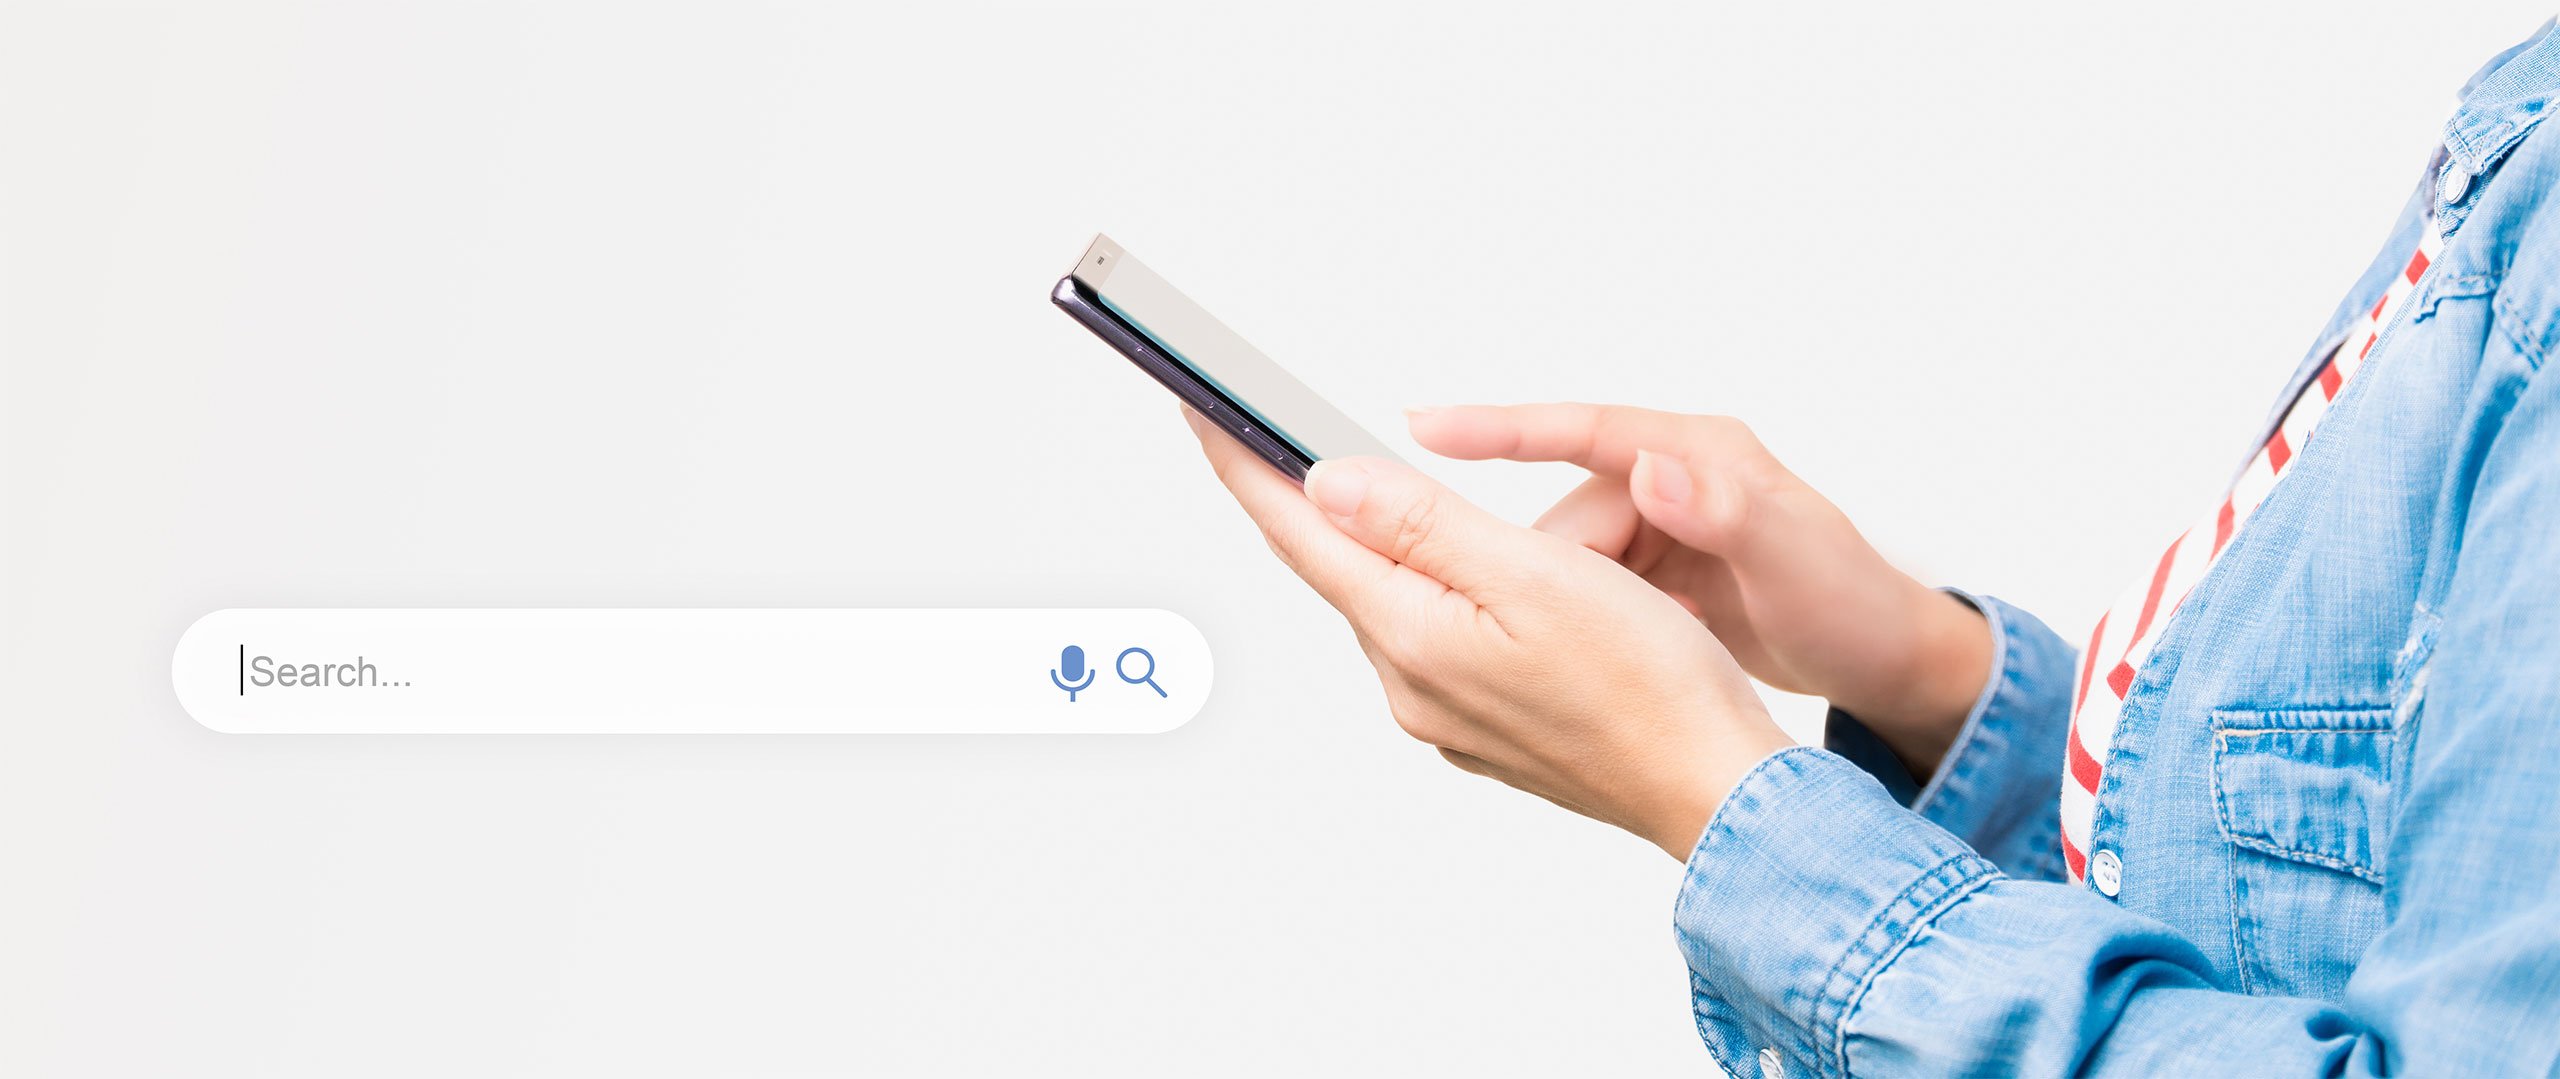 Person searching on smart phone next to white search bar illustration.